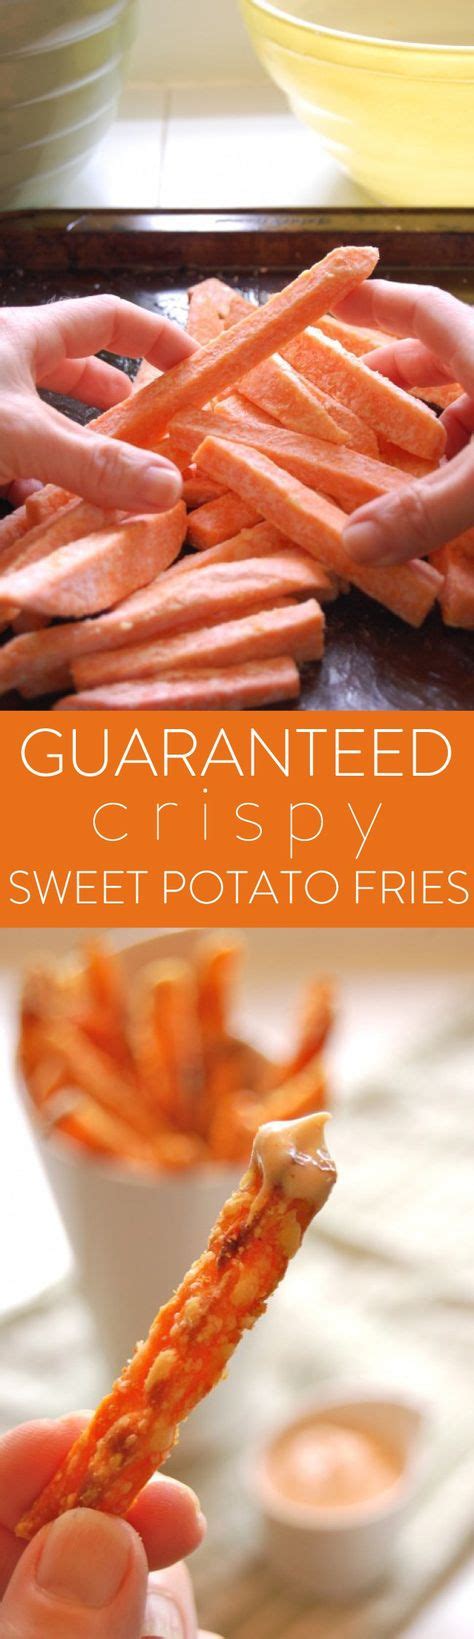 This sweet potato fries dip has a spicy kick that pairs perfectly with the sweetness of the potatoes. Guaranteed Crispy Sweet Potato Fries & Sriracha Mayo Dip | Recipe | Sweet potato fries, Crispy ...